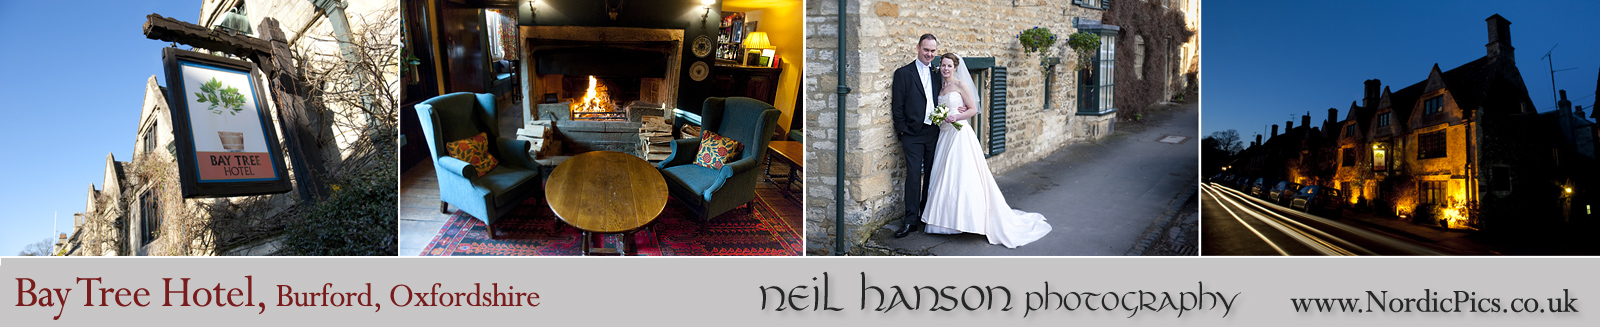 Neil Hanson Photography provides contemporary Wedding Photography for The Bay Tree Hotel, Burford